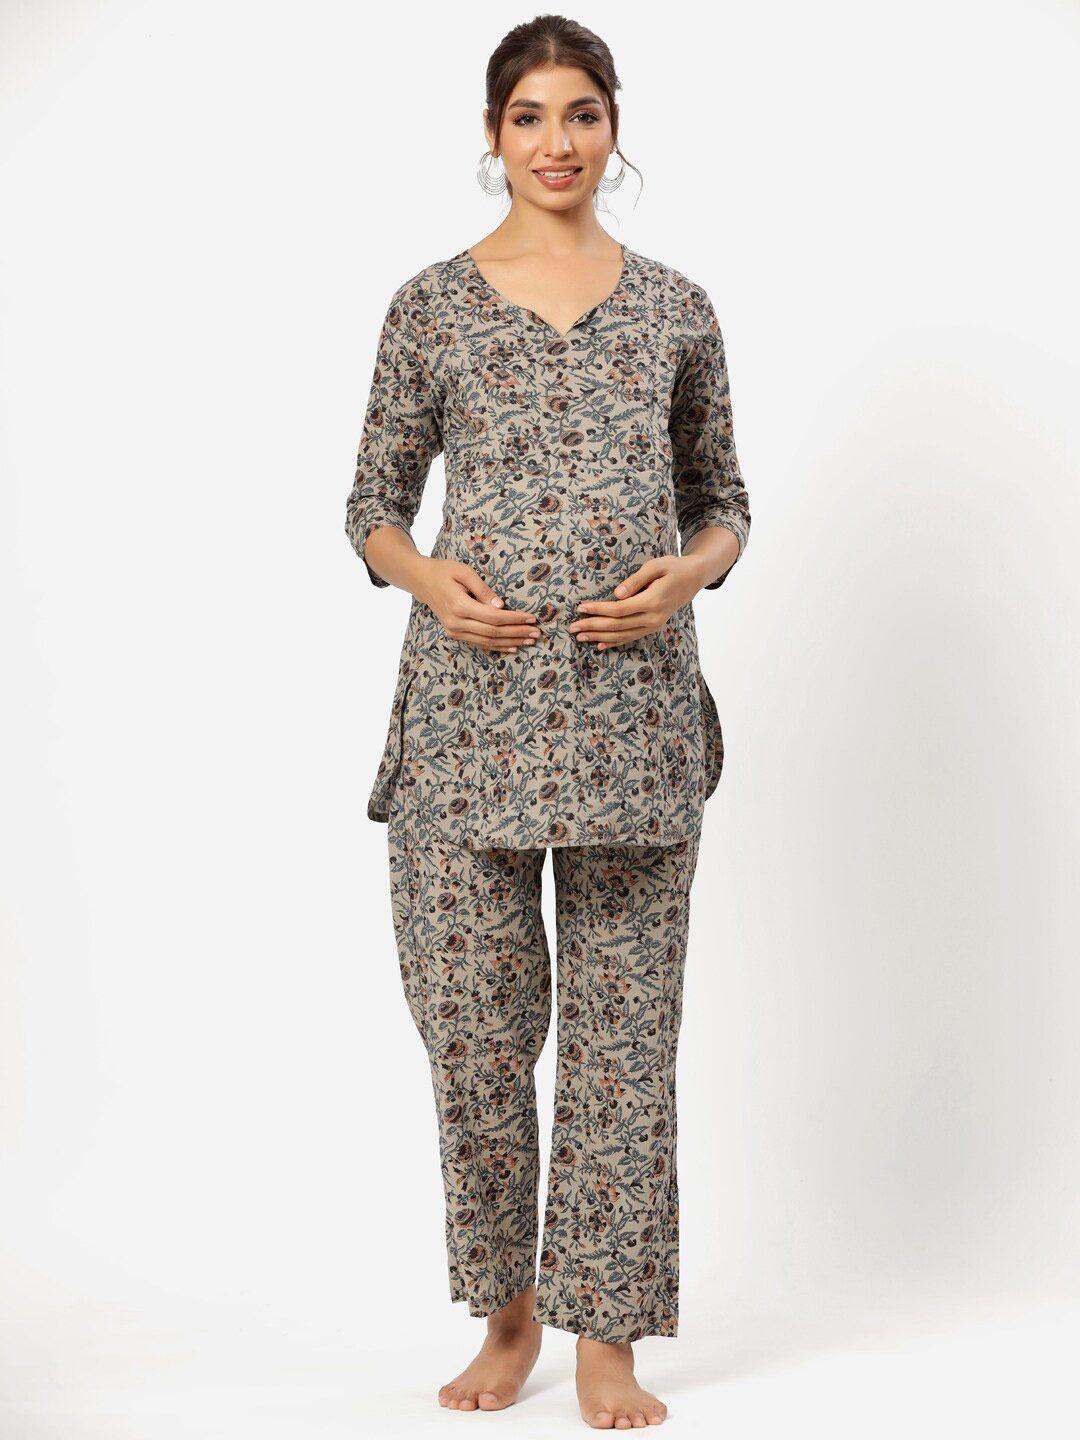 crafiqa floral printed pure cotton maternity nightdress